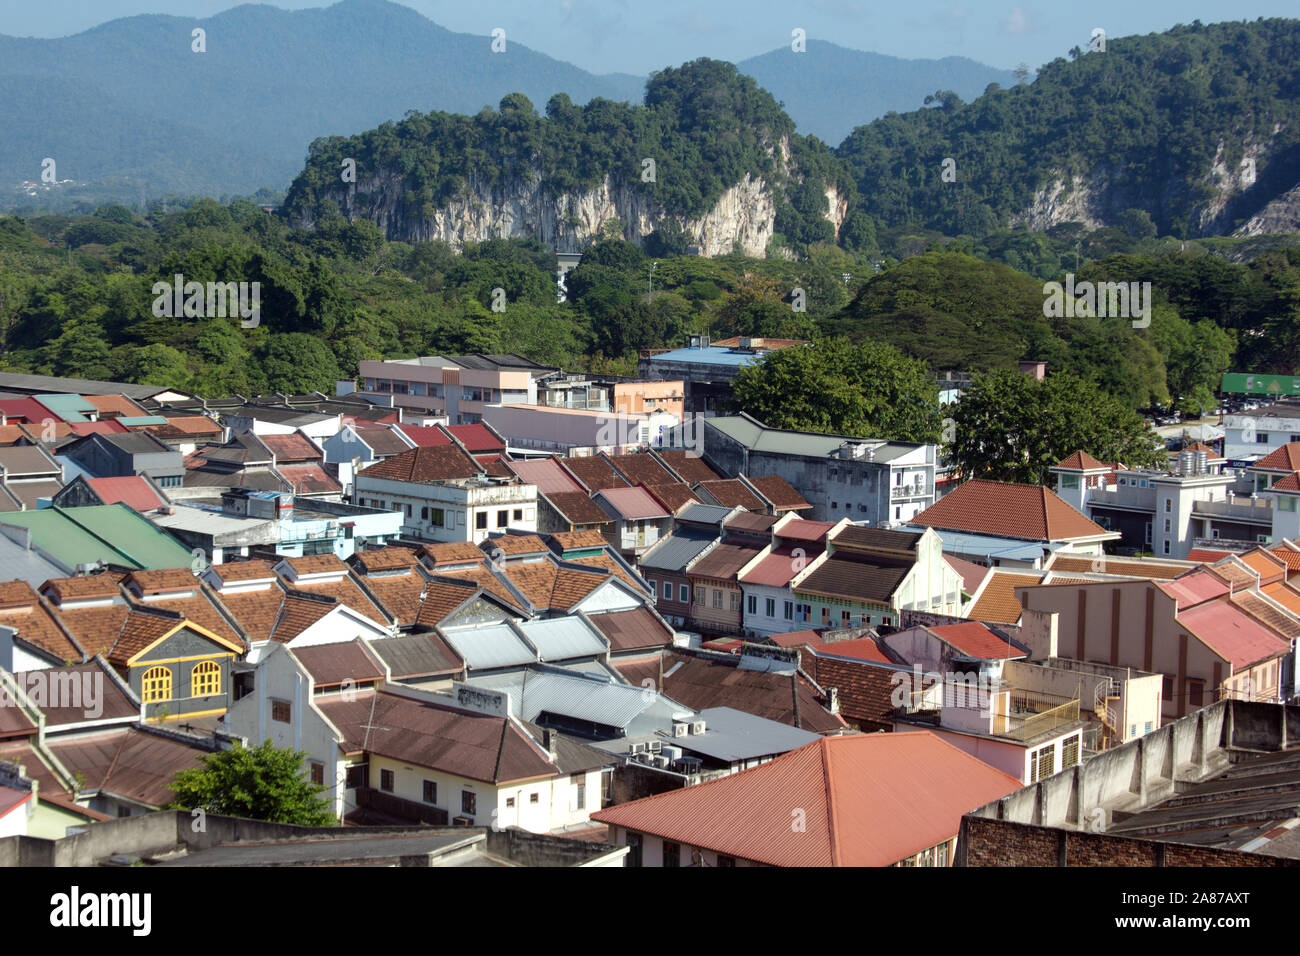 Ipoh, Perak, Malaysia, is a low-rise city surrounded by mountains Stock